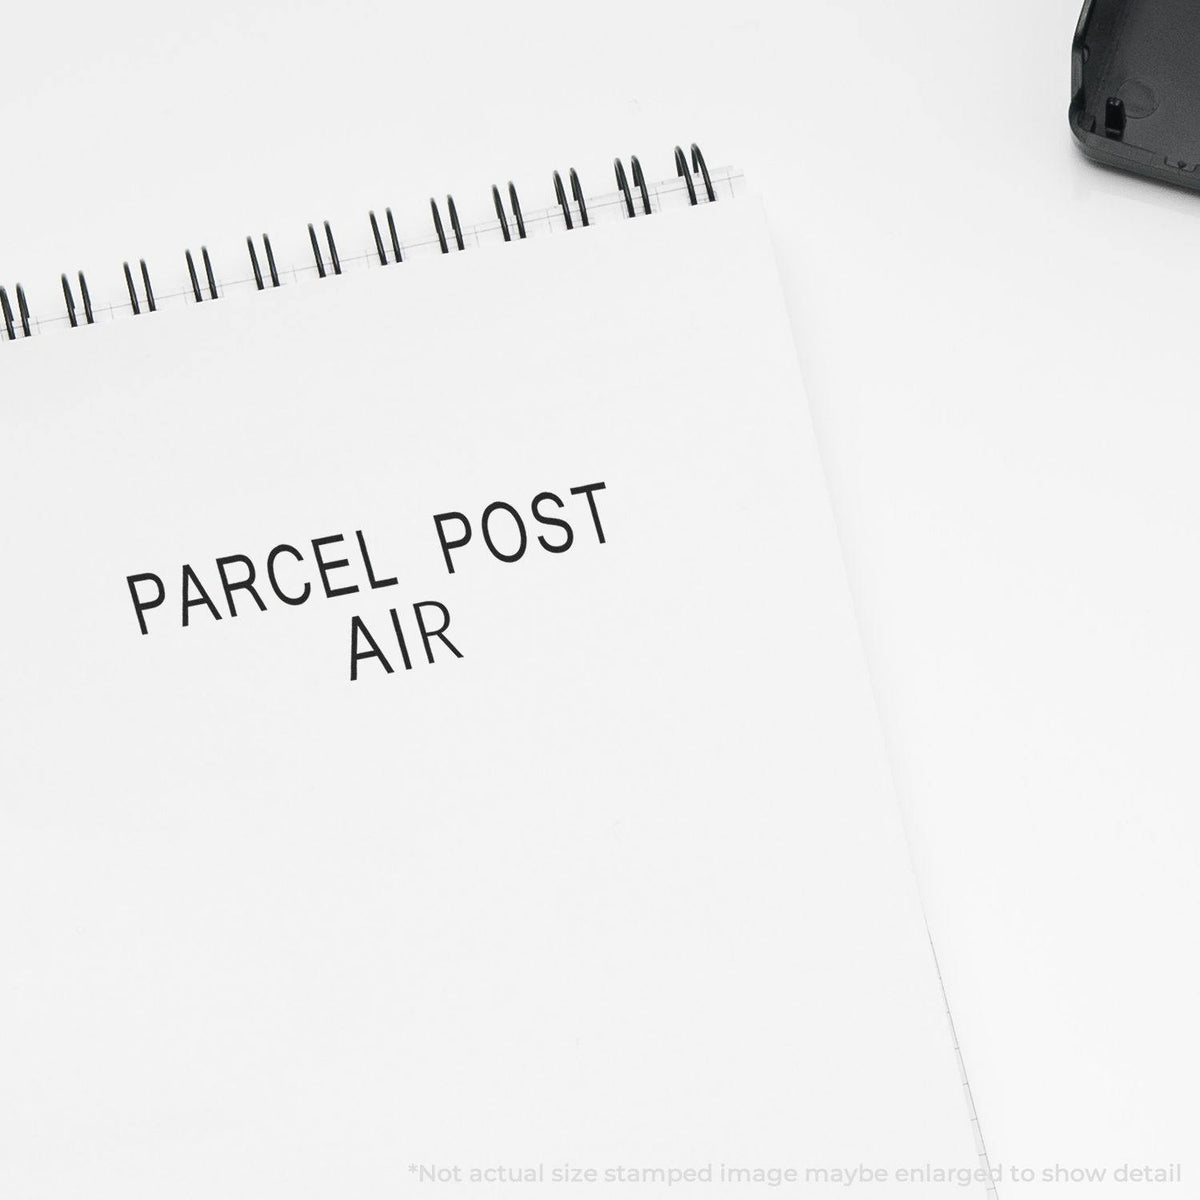 Large Pre-Inked Parcel Post Air Stamp In Use Photo